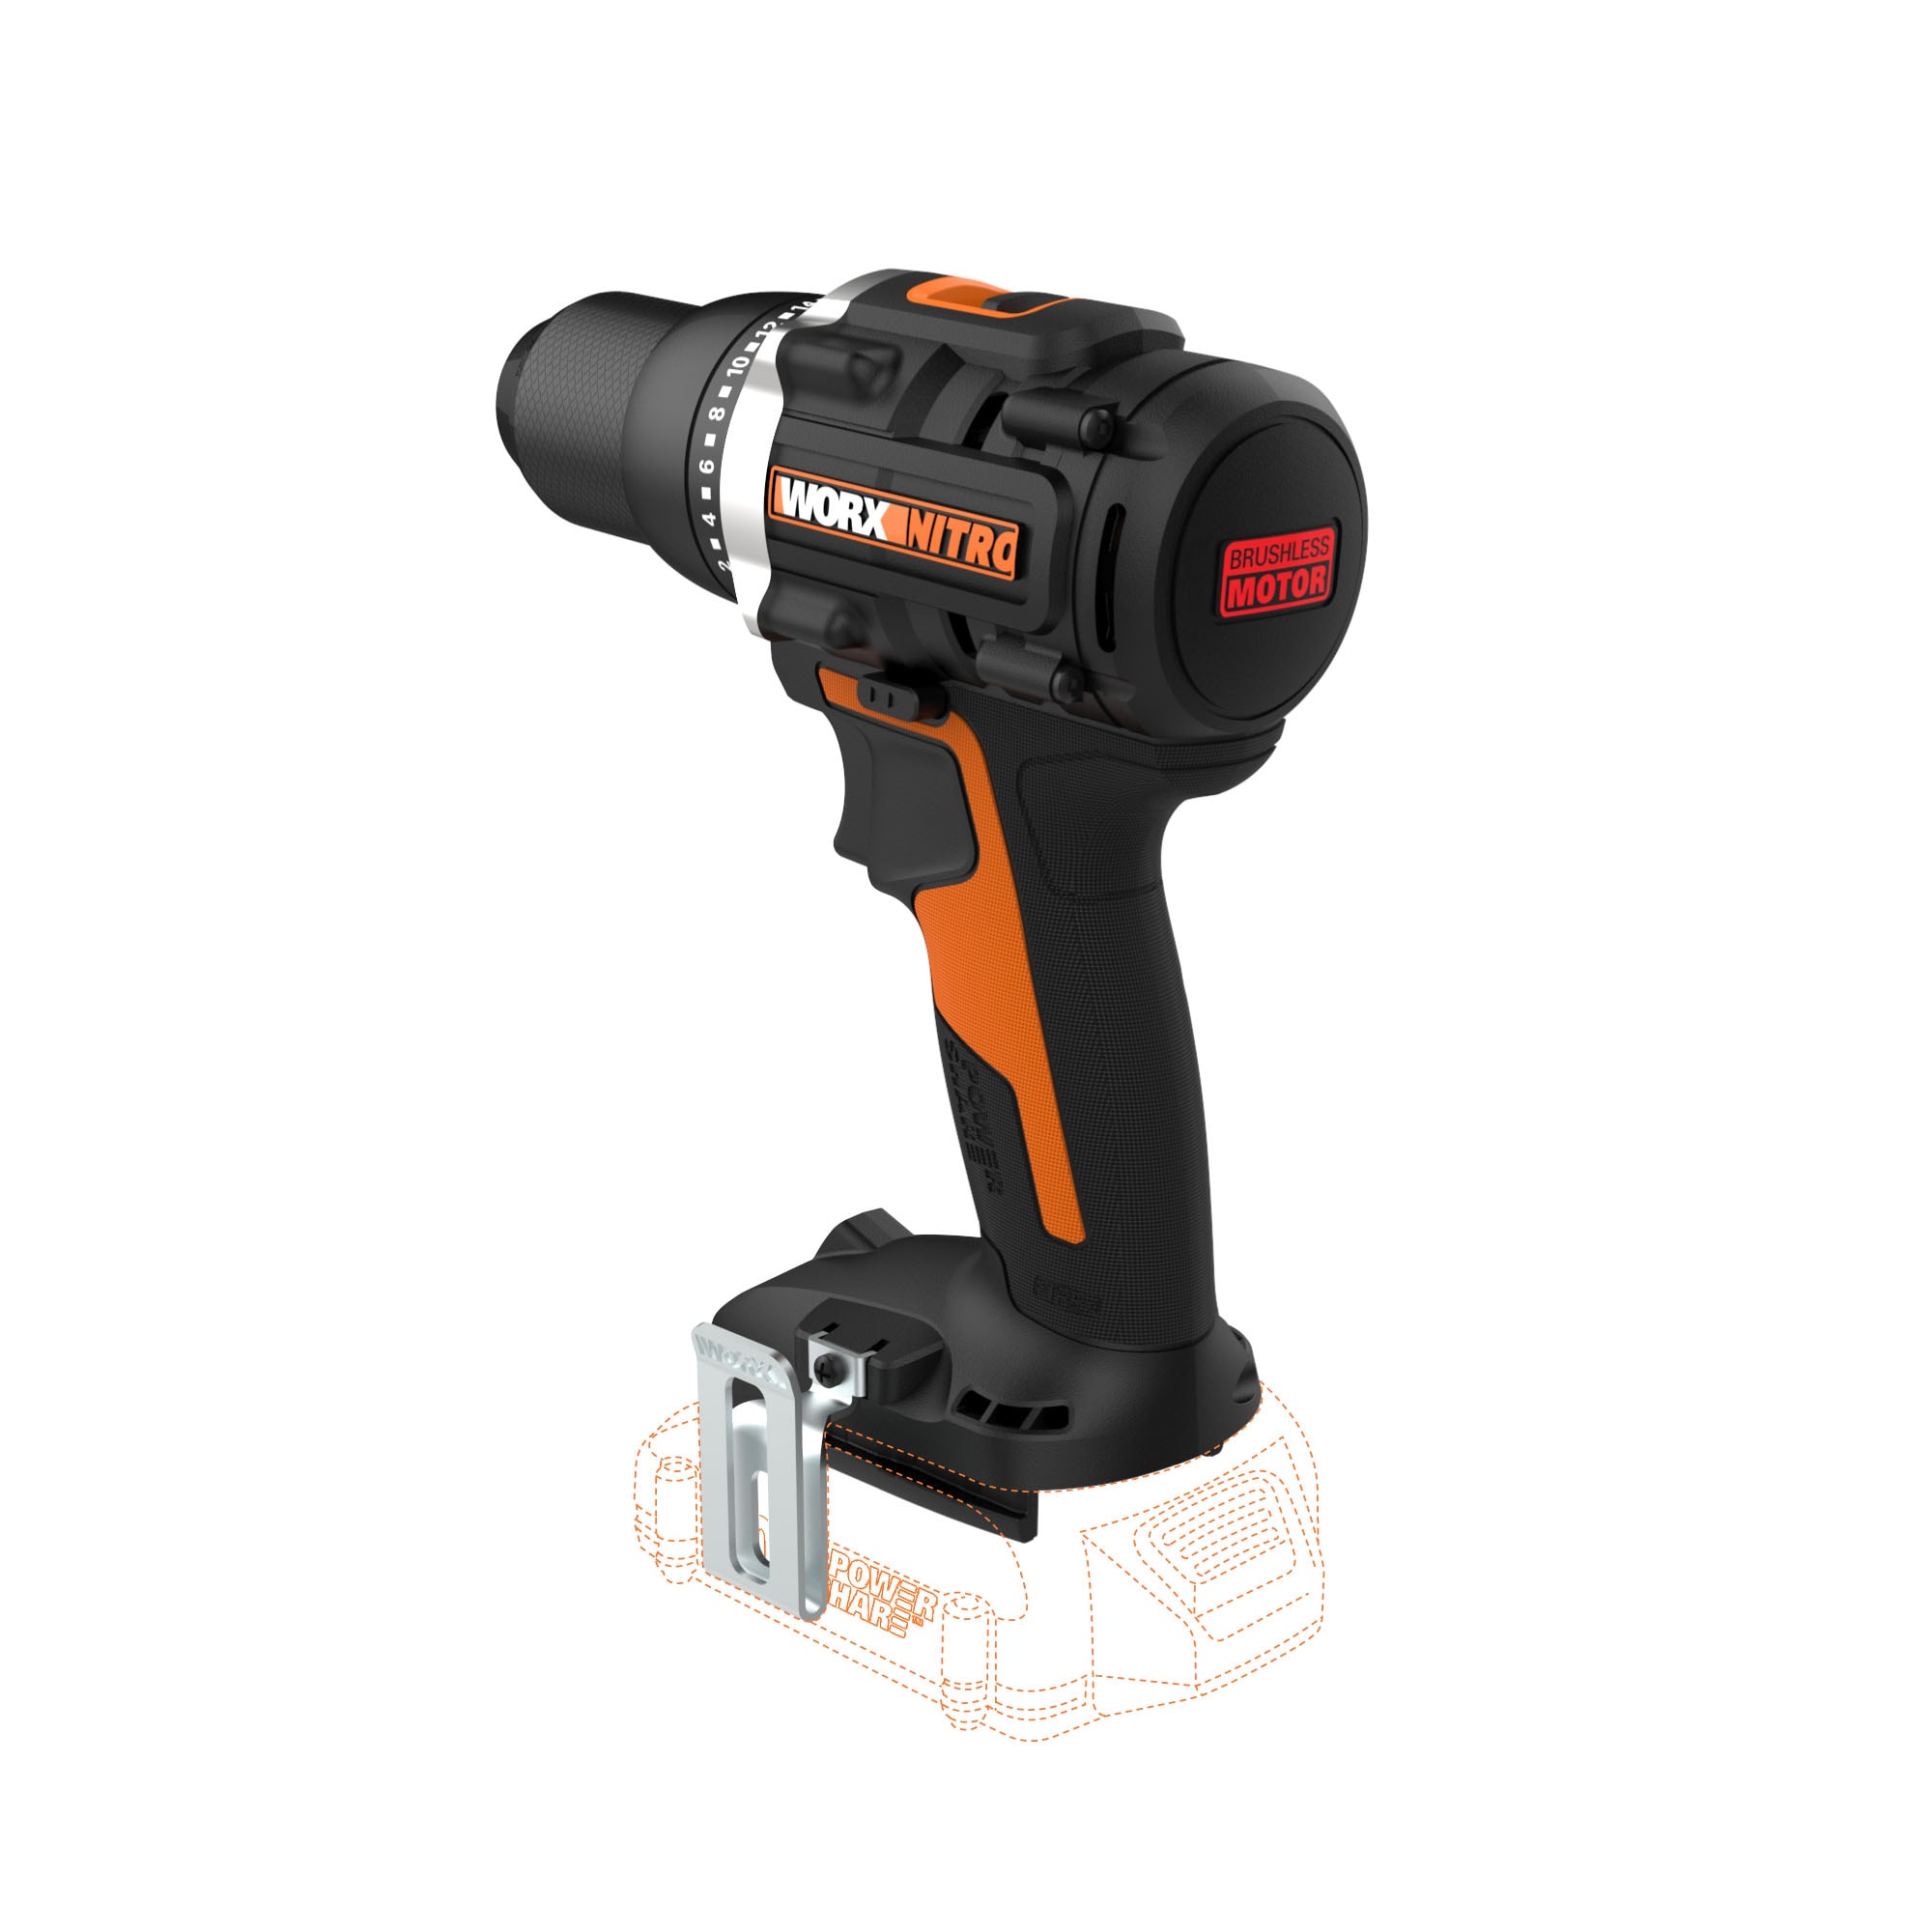 WORX Nitro Power Share 20-volt Max 1/2-in Brushless Cordless Drill in ...